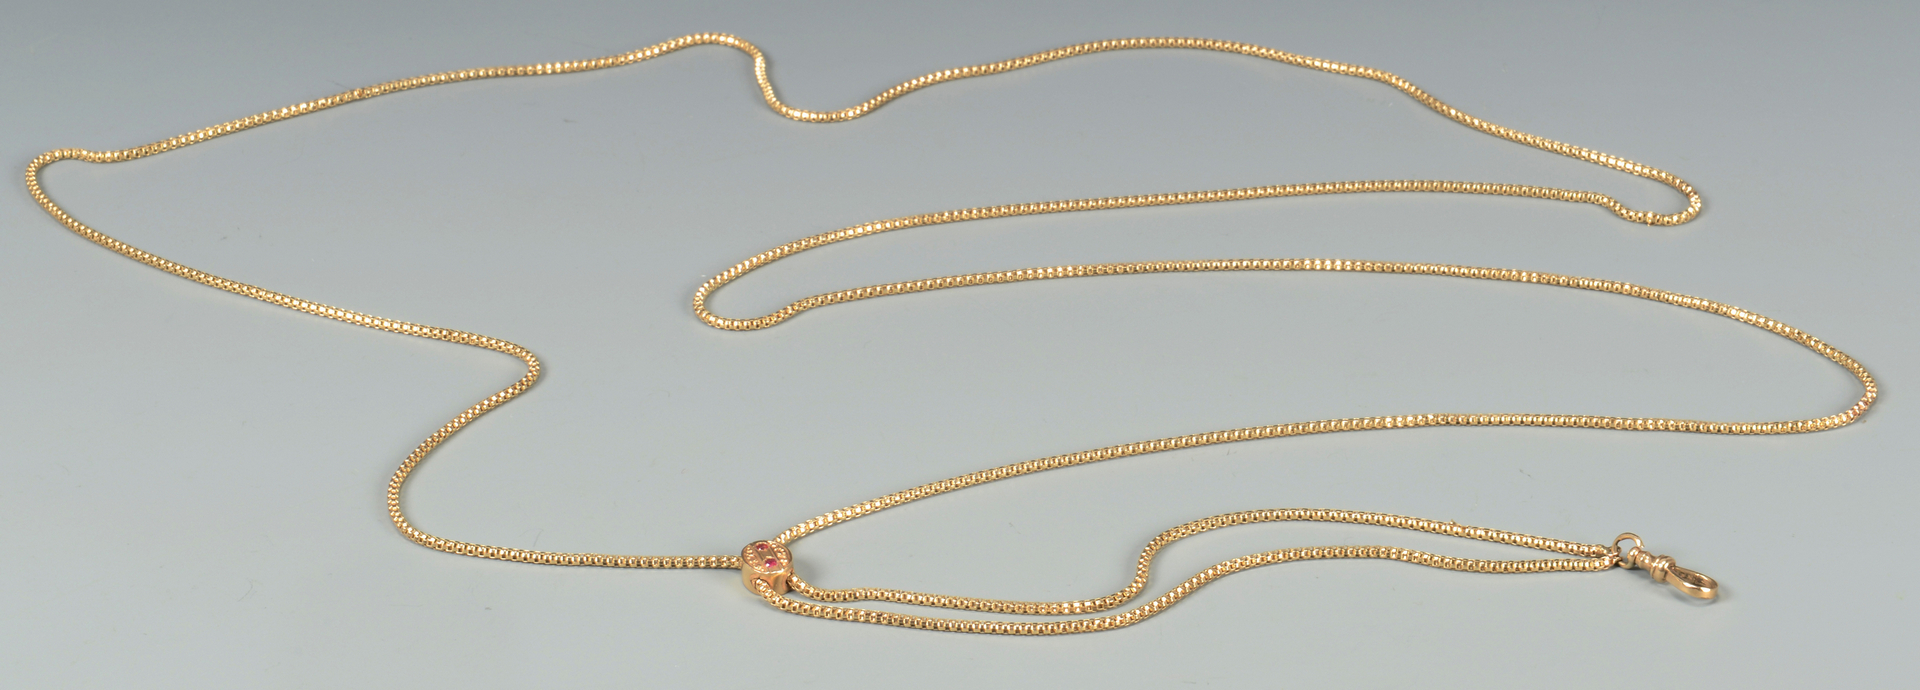 Lot 588: Gold Watch Chain with Slide